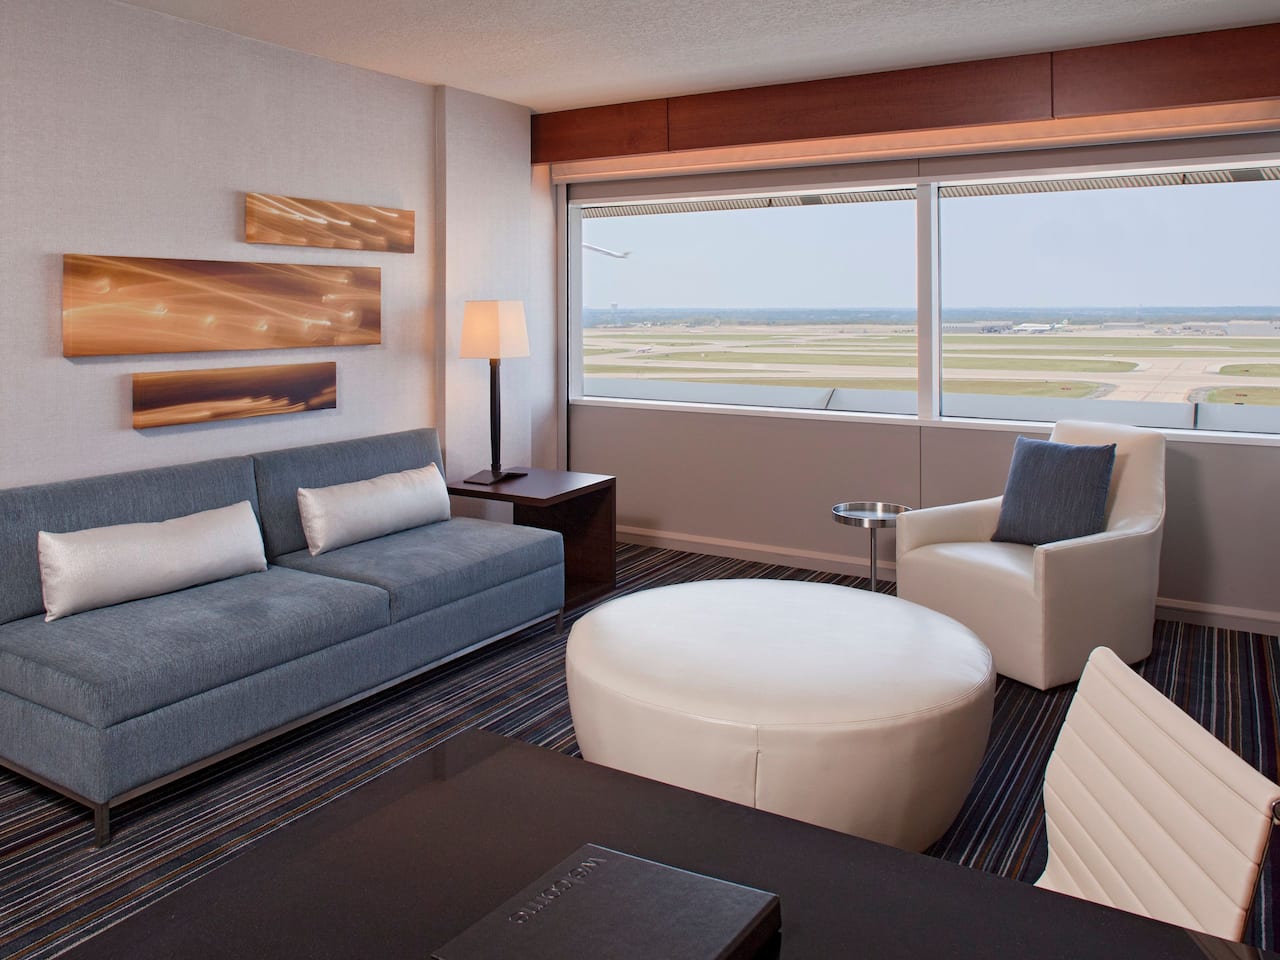 Executive Suite living room with sofa seating and runway view